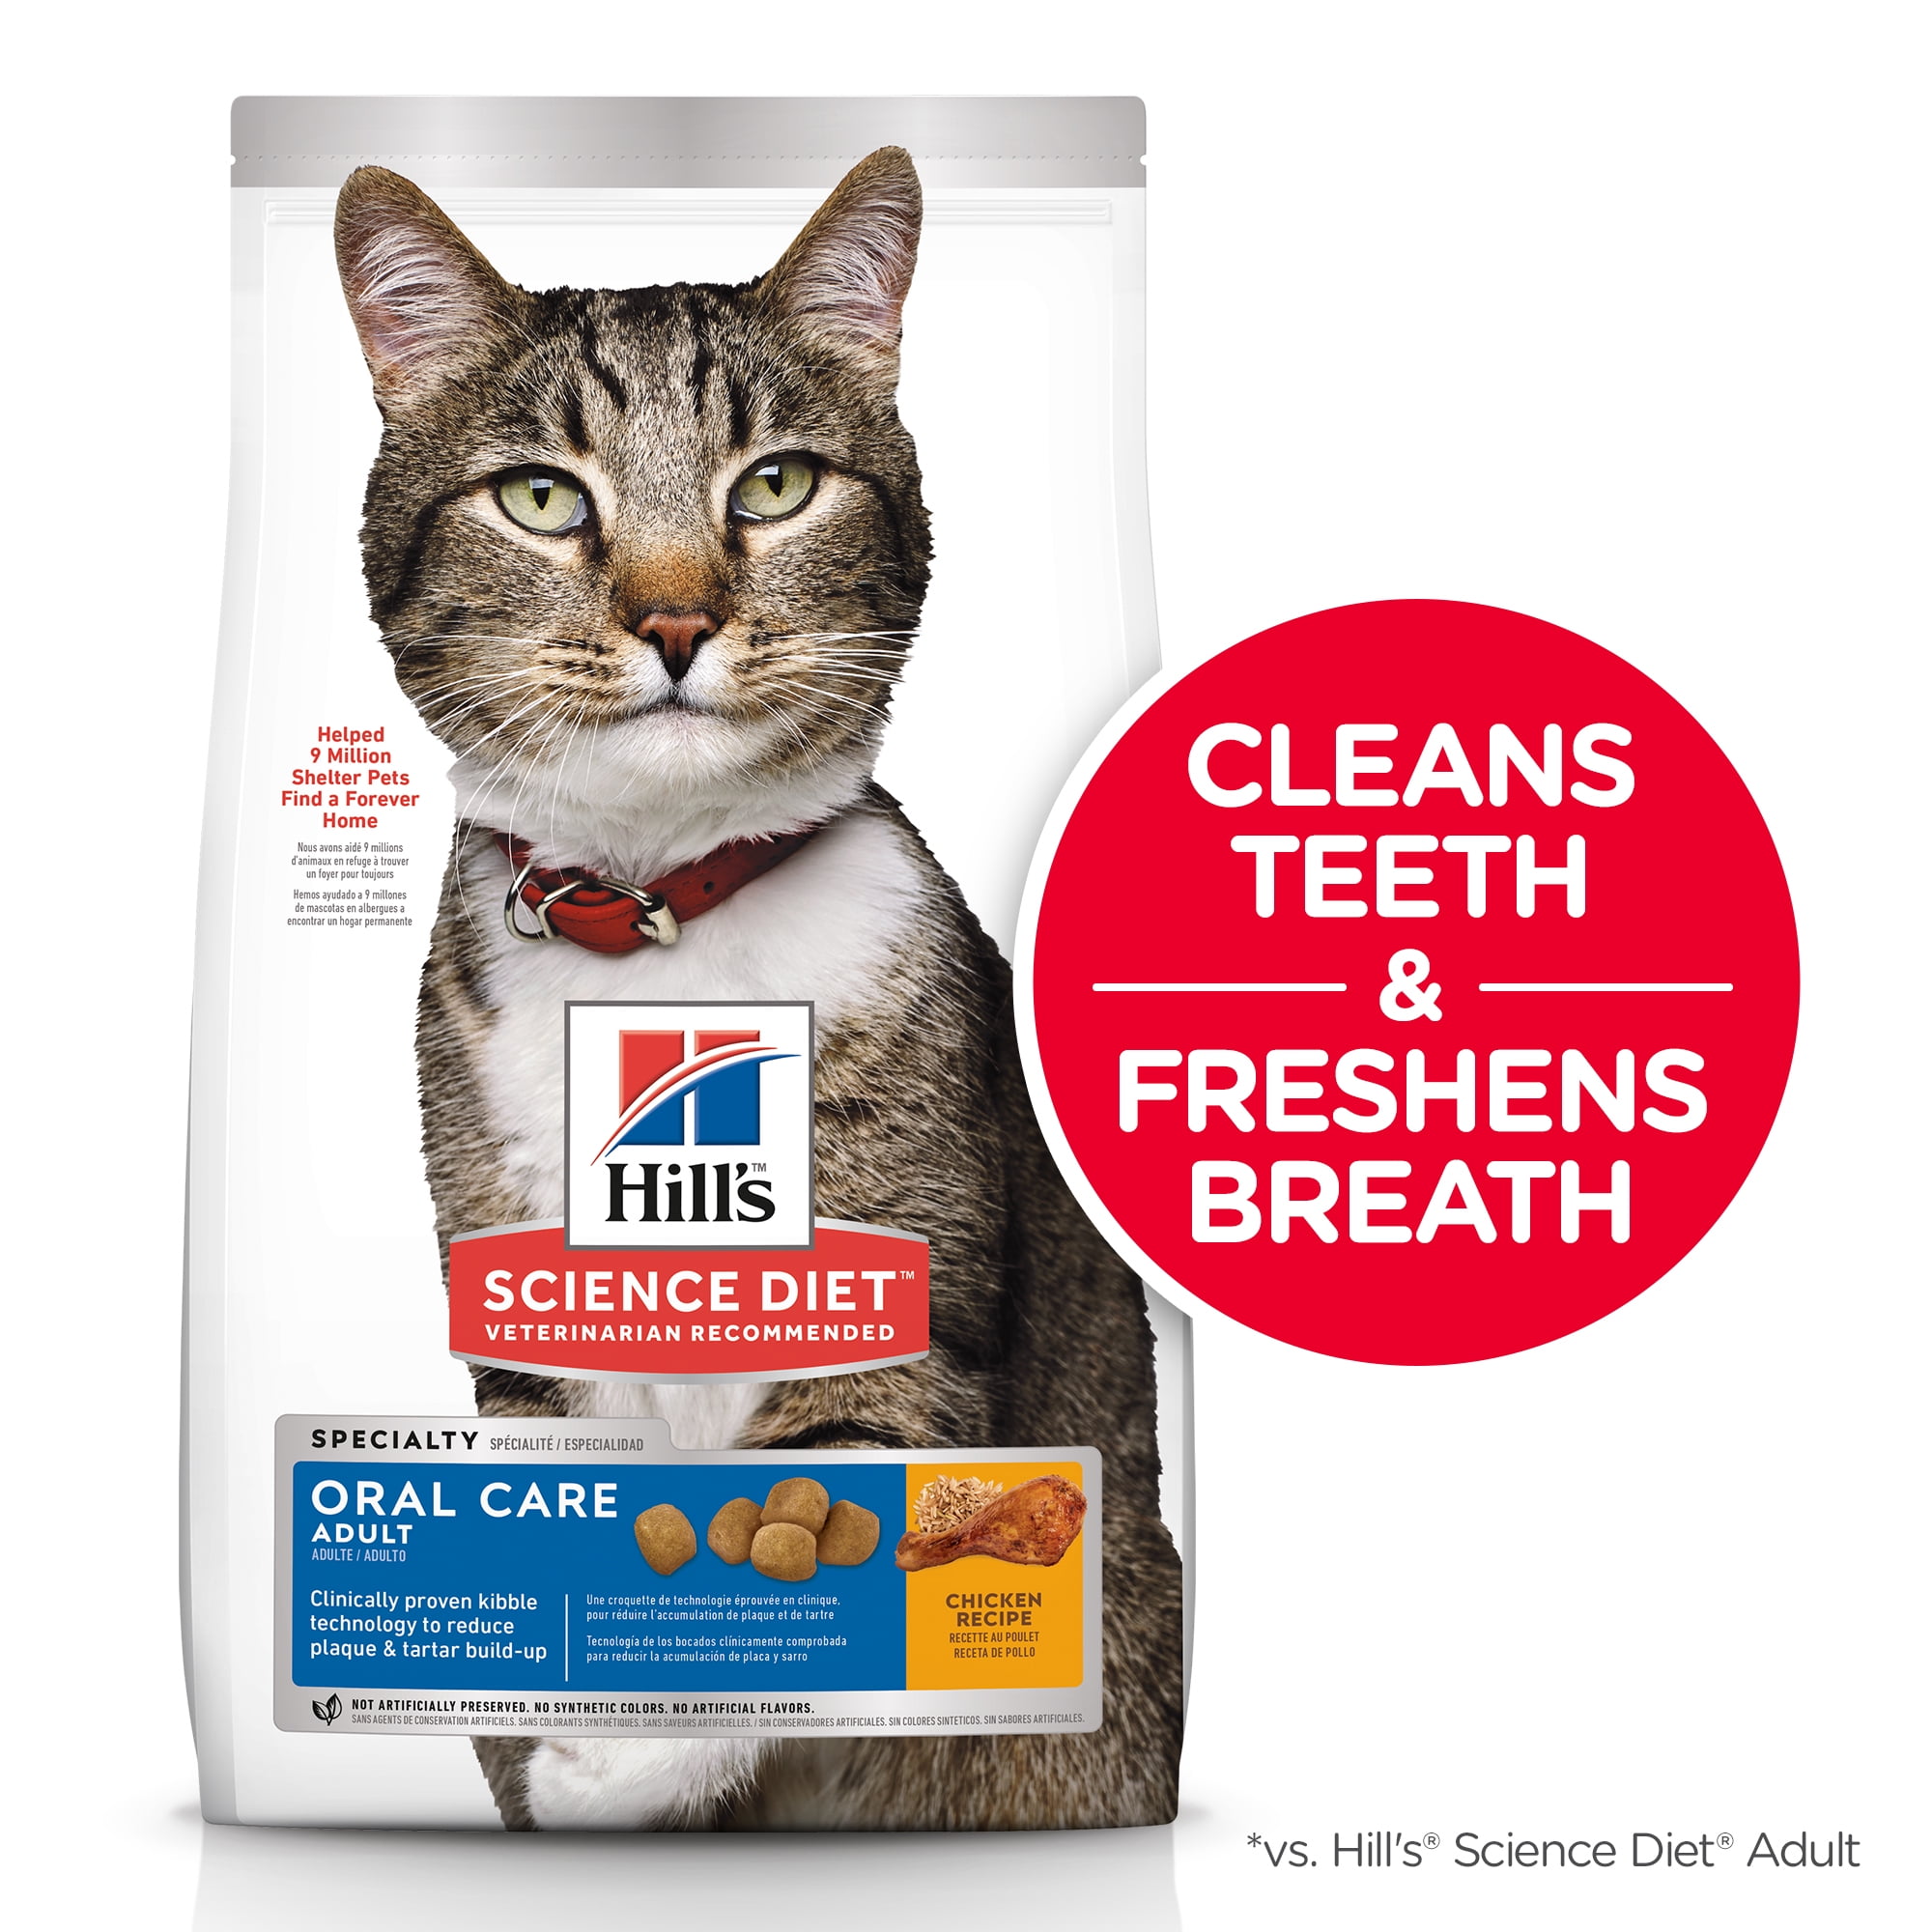 hill's science diet oral care cat food